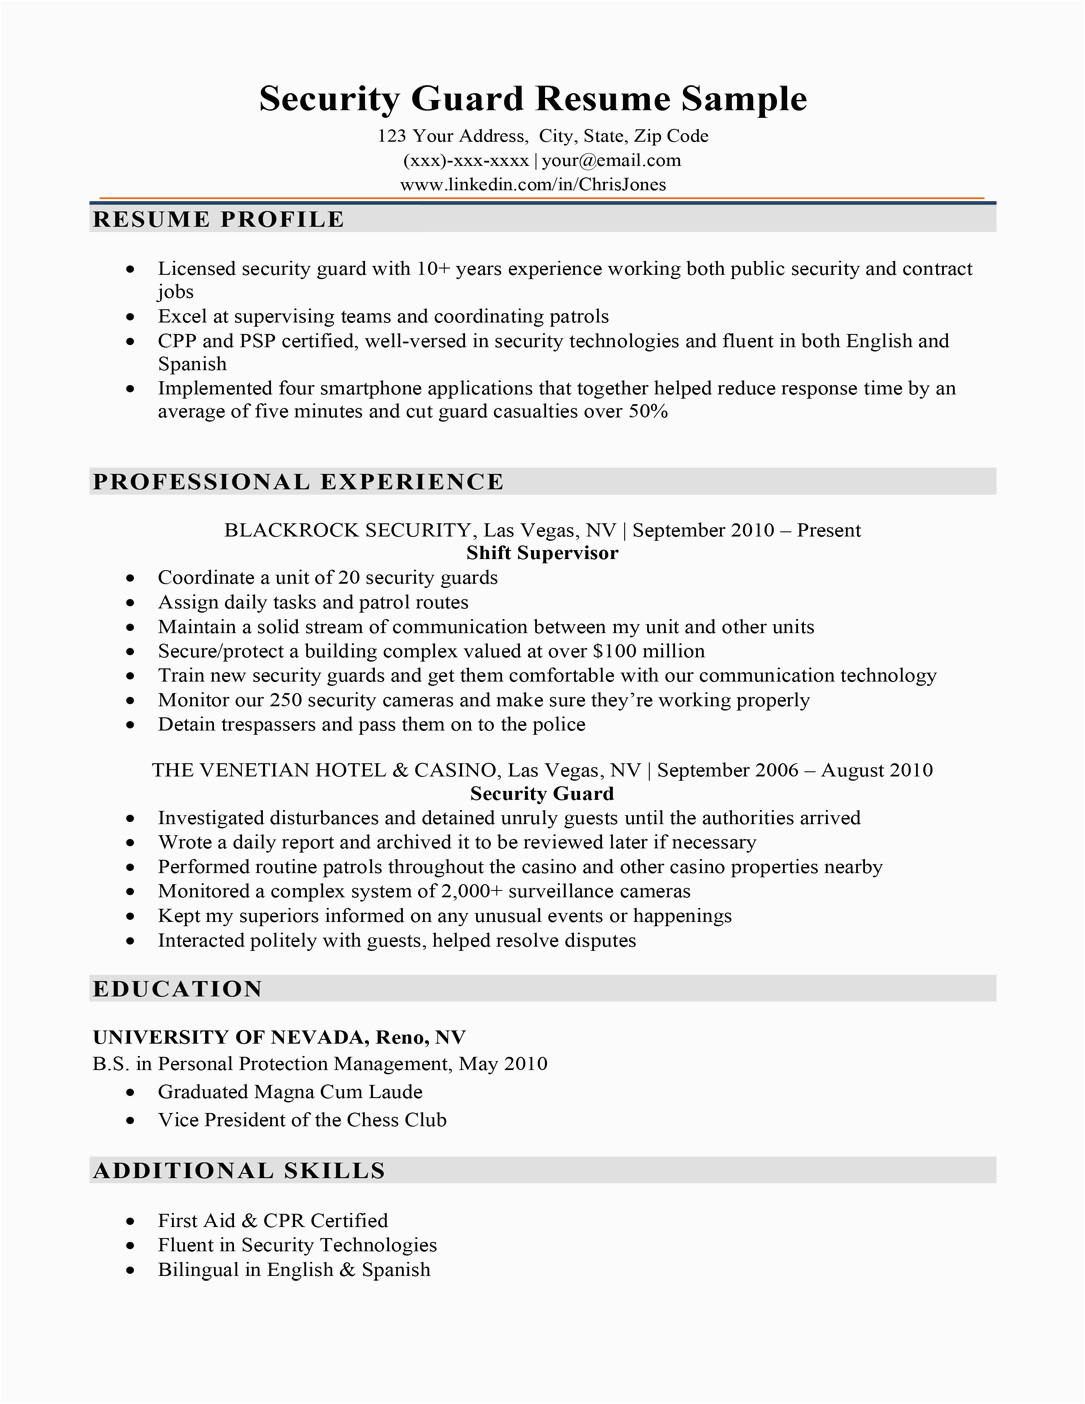 Resume Sample for New Security Guard Security Guard Resume Sample & Writing Tips